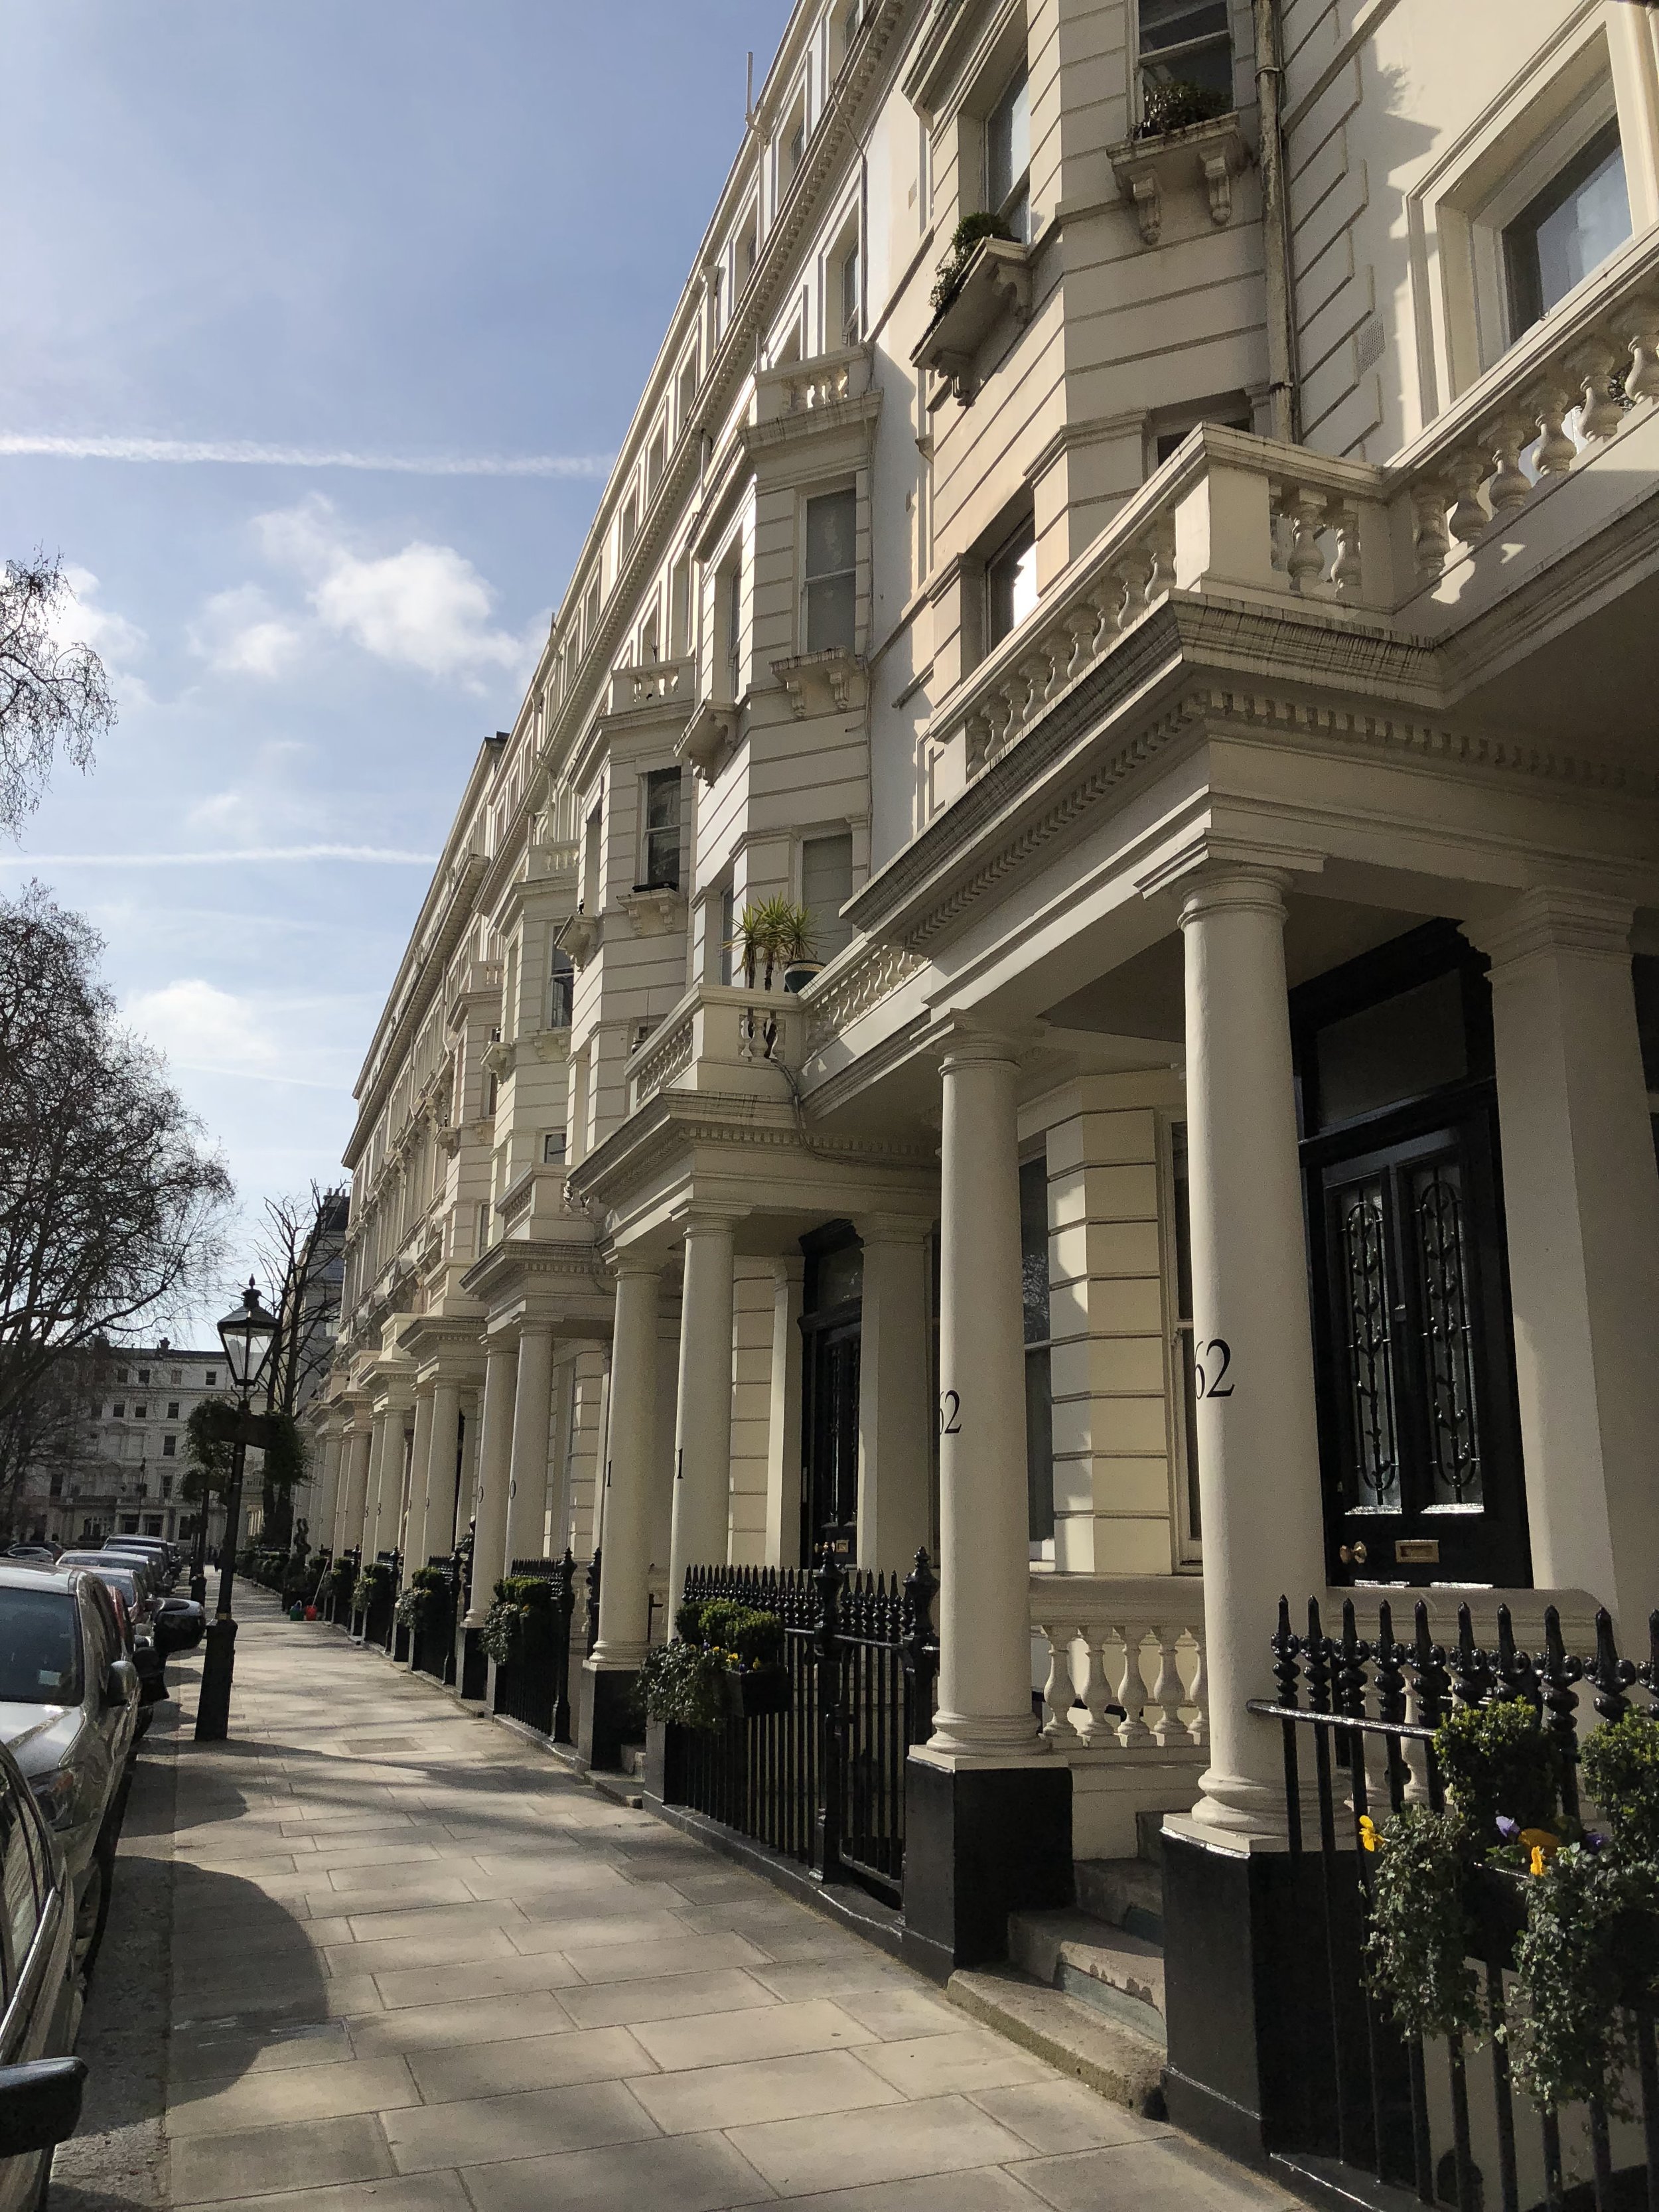 Row of Townhouses in the Royal Borough of Kensington and Chelsea